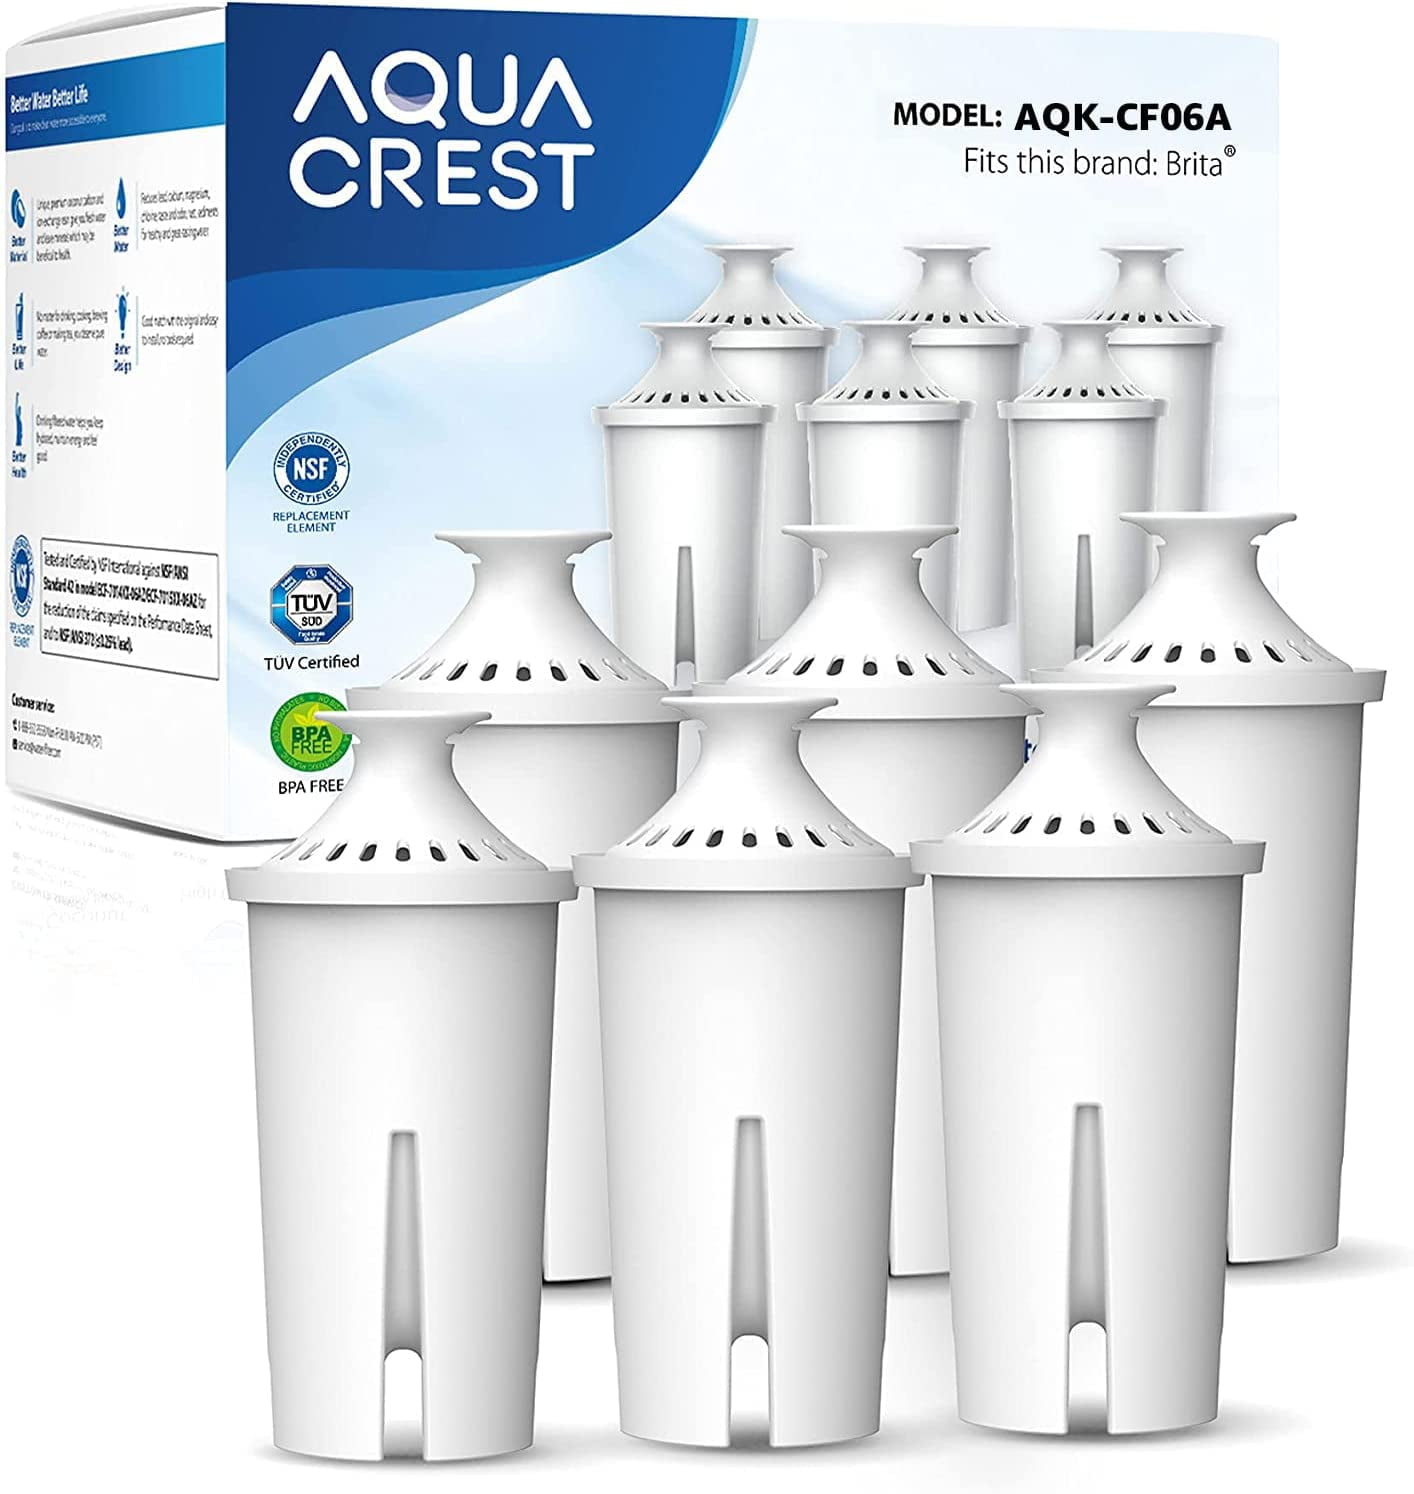 Fits Wamery Lake Ind Mavea Pitcher. Certified Water Filter Replacement 3 Pack 